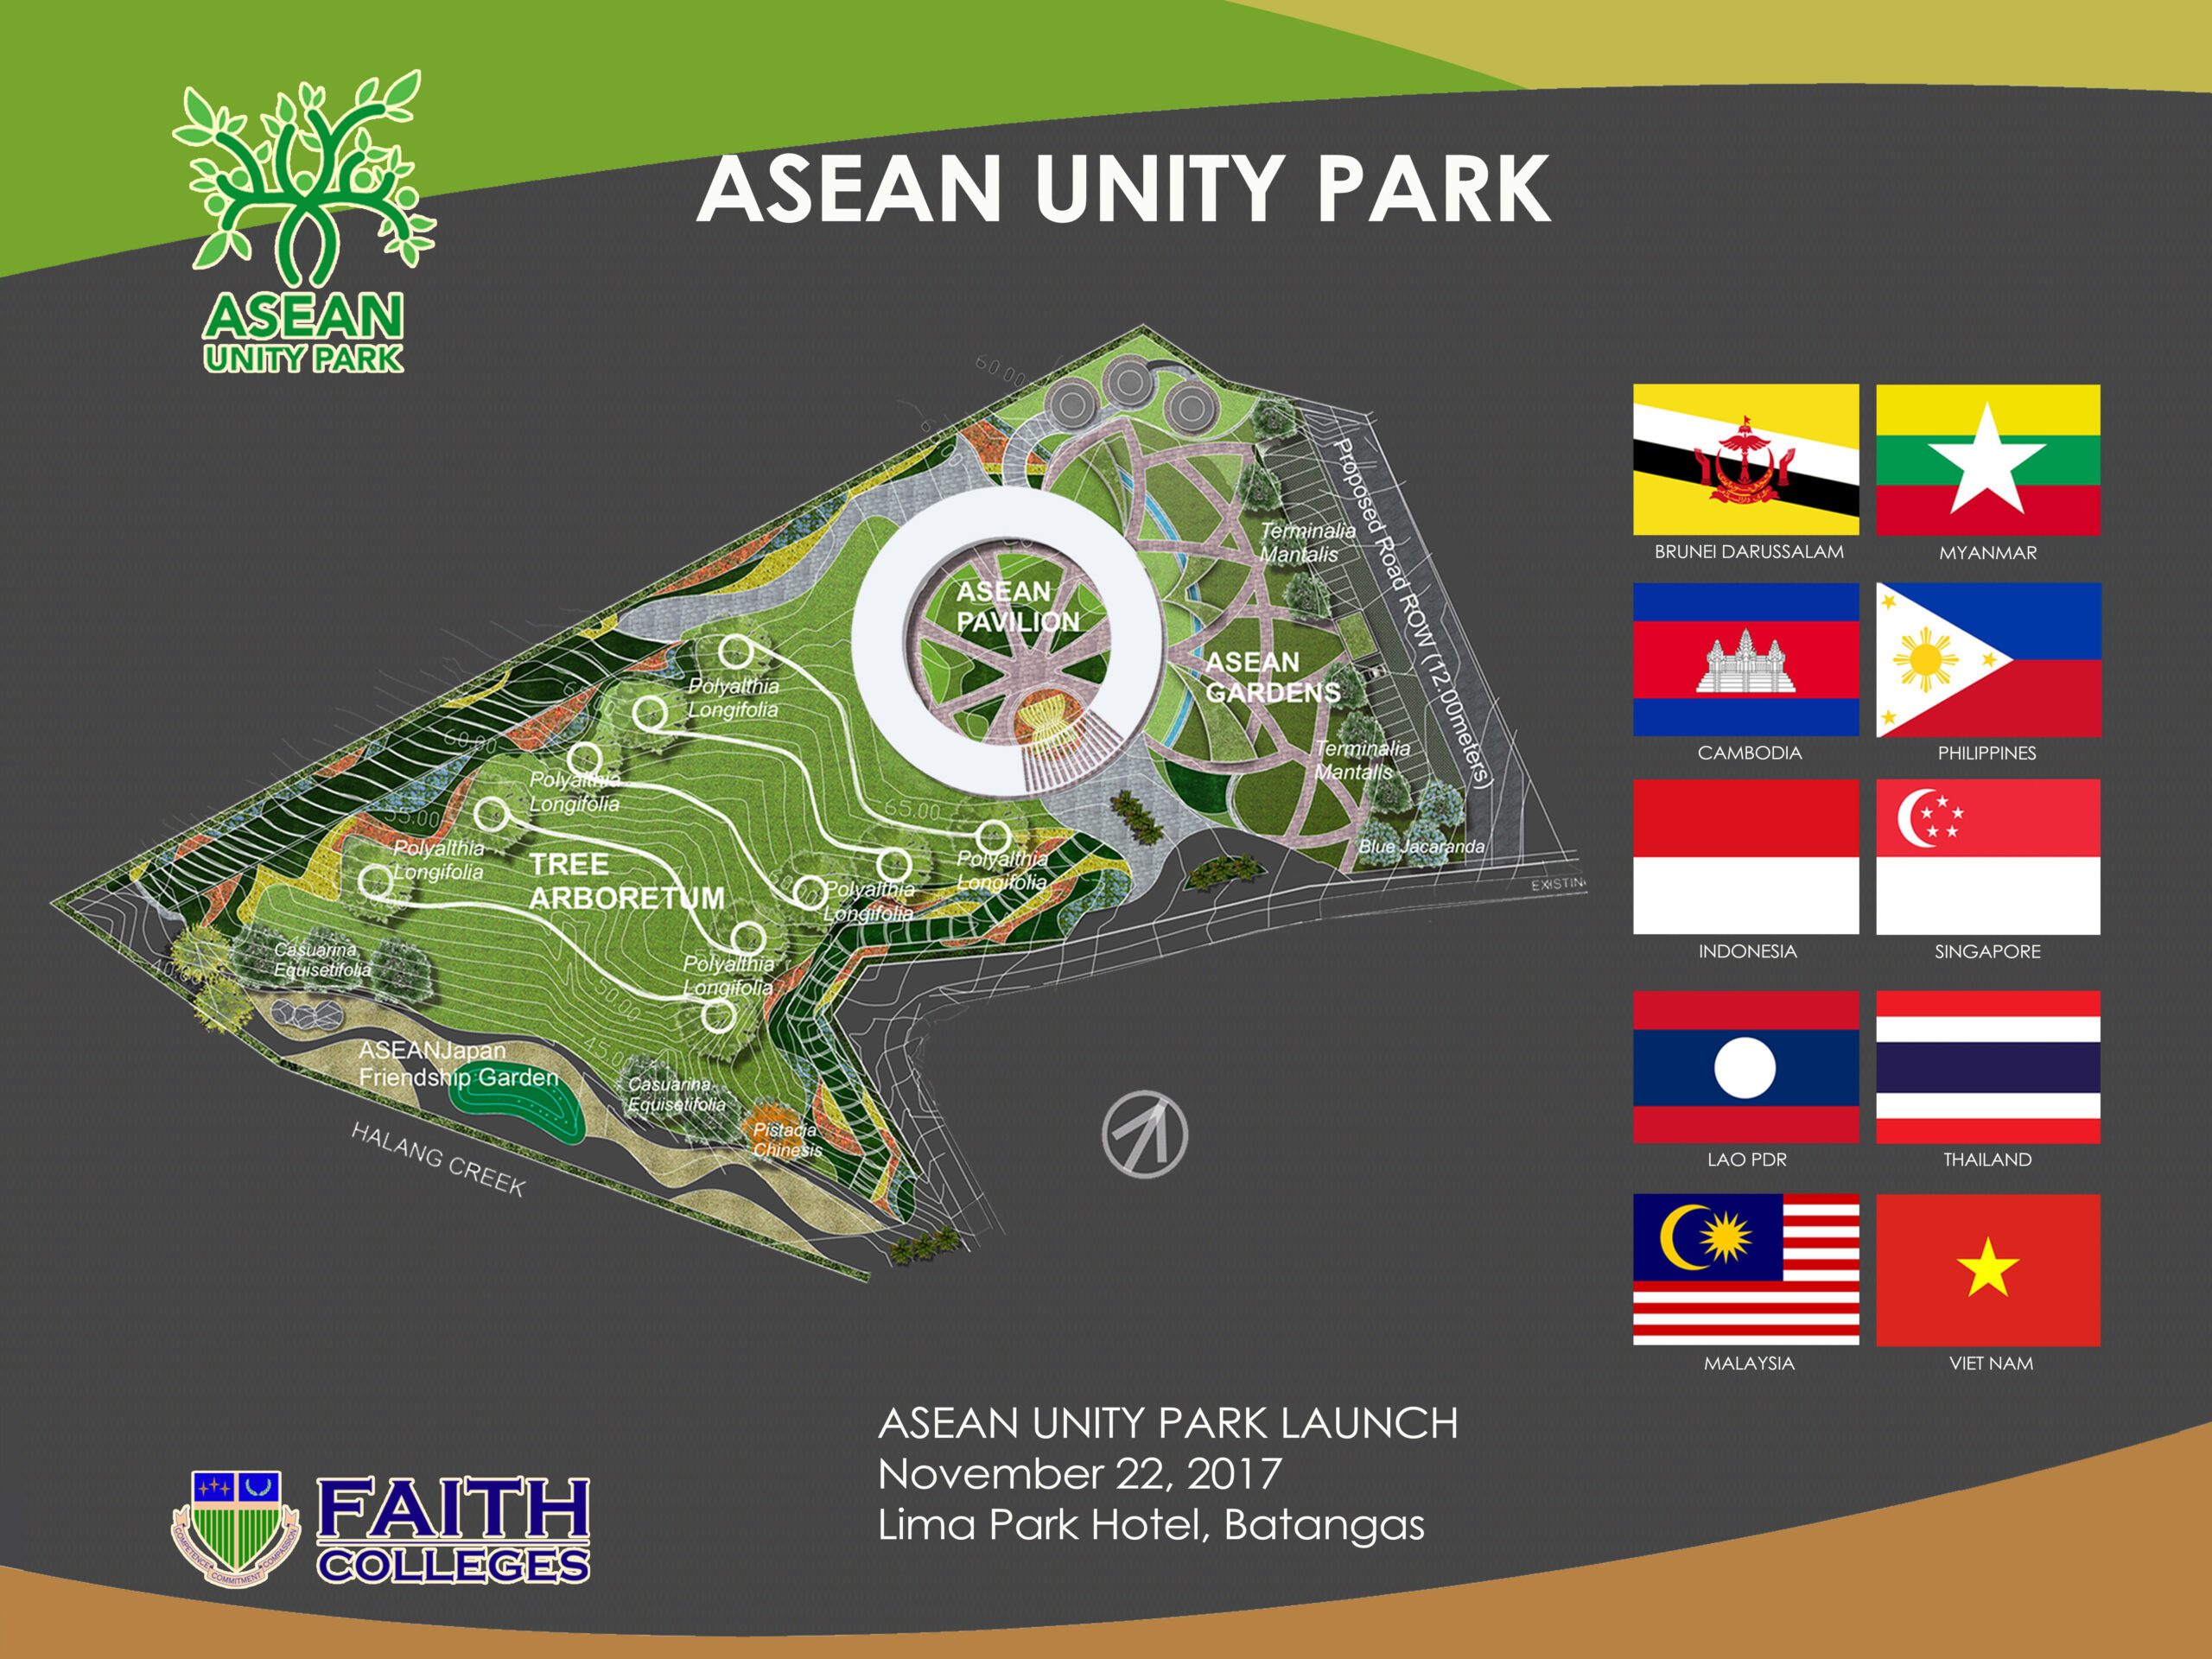 ASEAN Unity Park to rise in Batangas